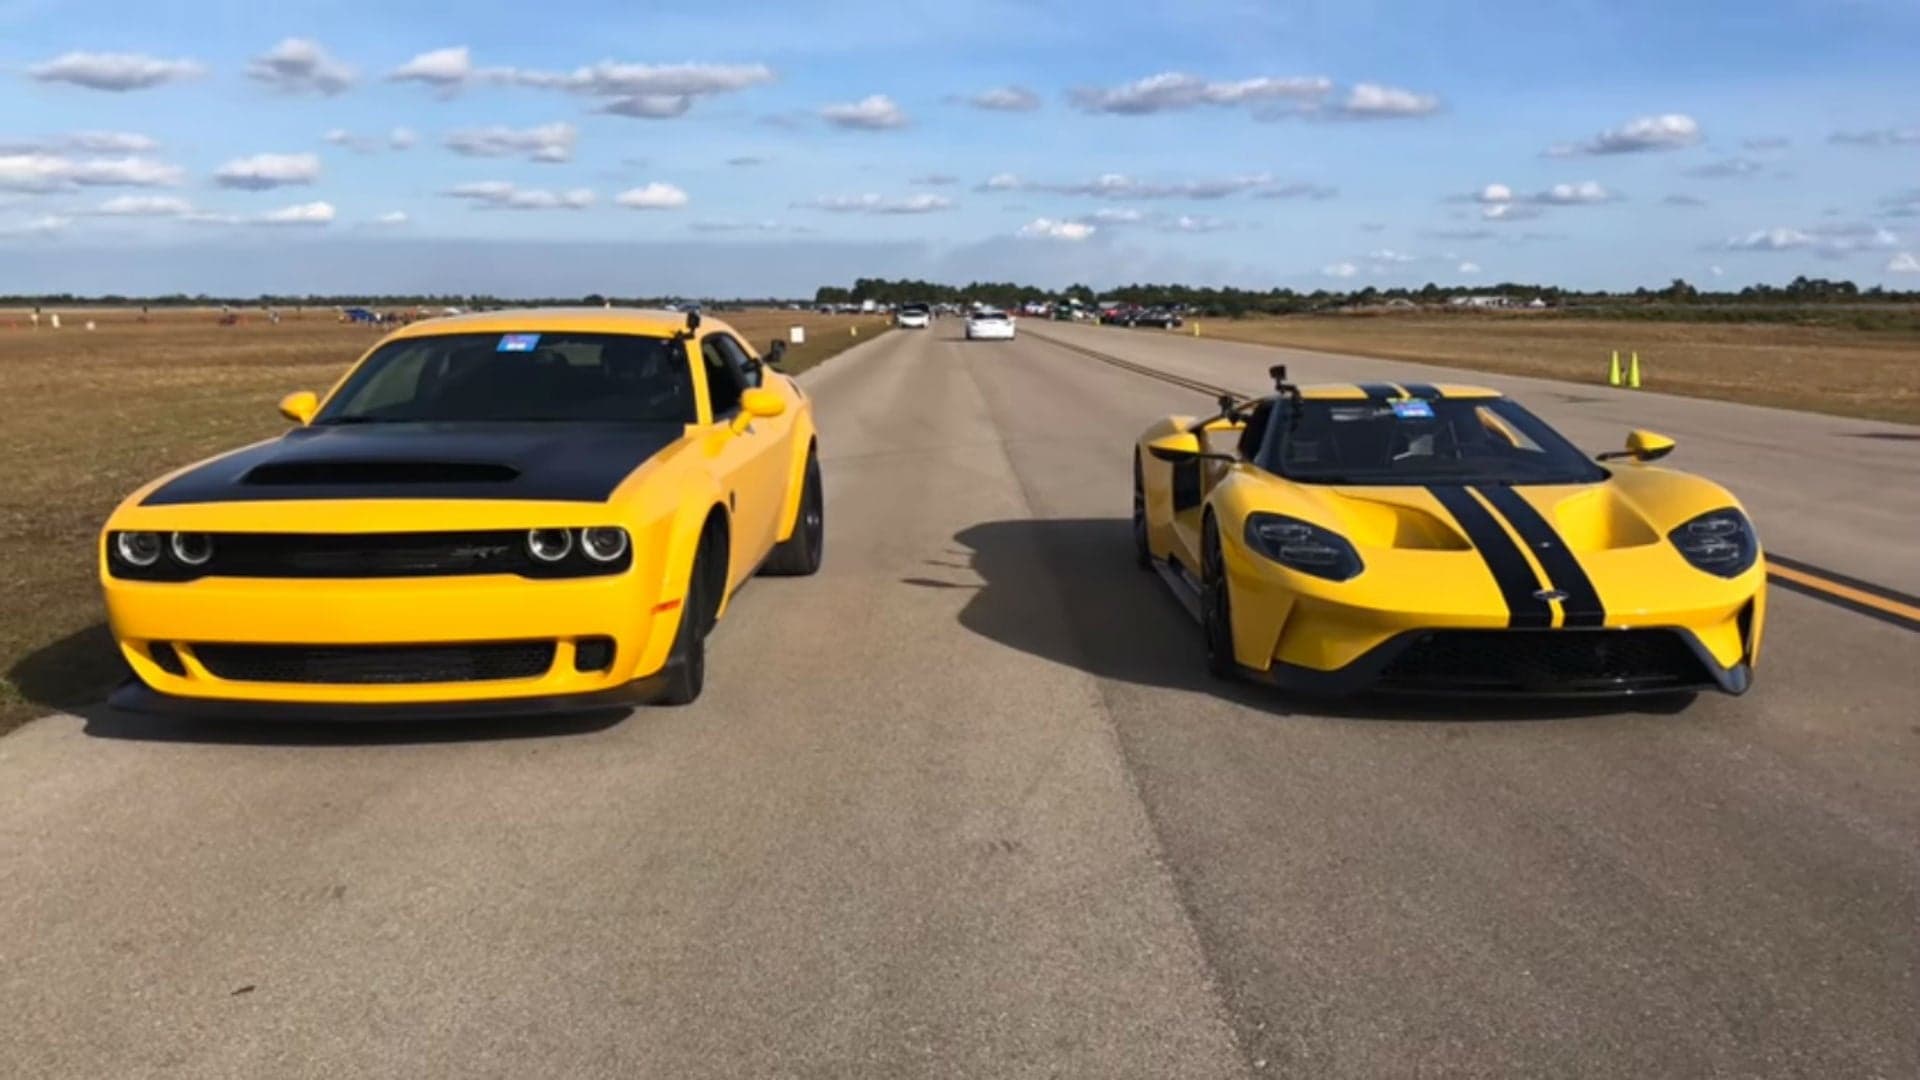 Watch a 2018 Ford GT Face Off Against the Dodge Challenger Demon in a Half-Mile Drag Race